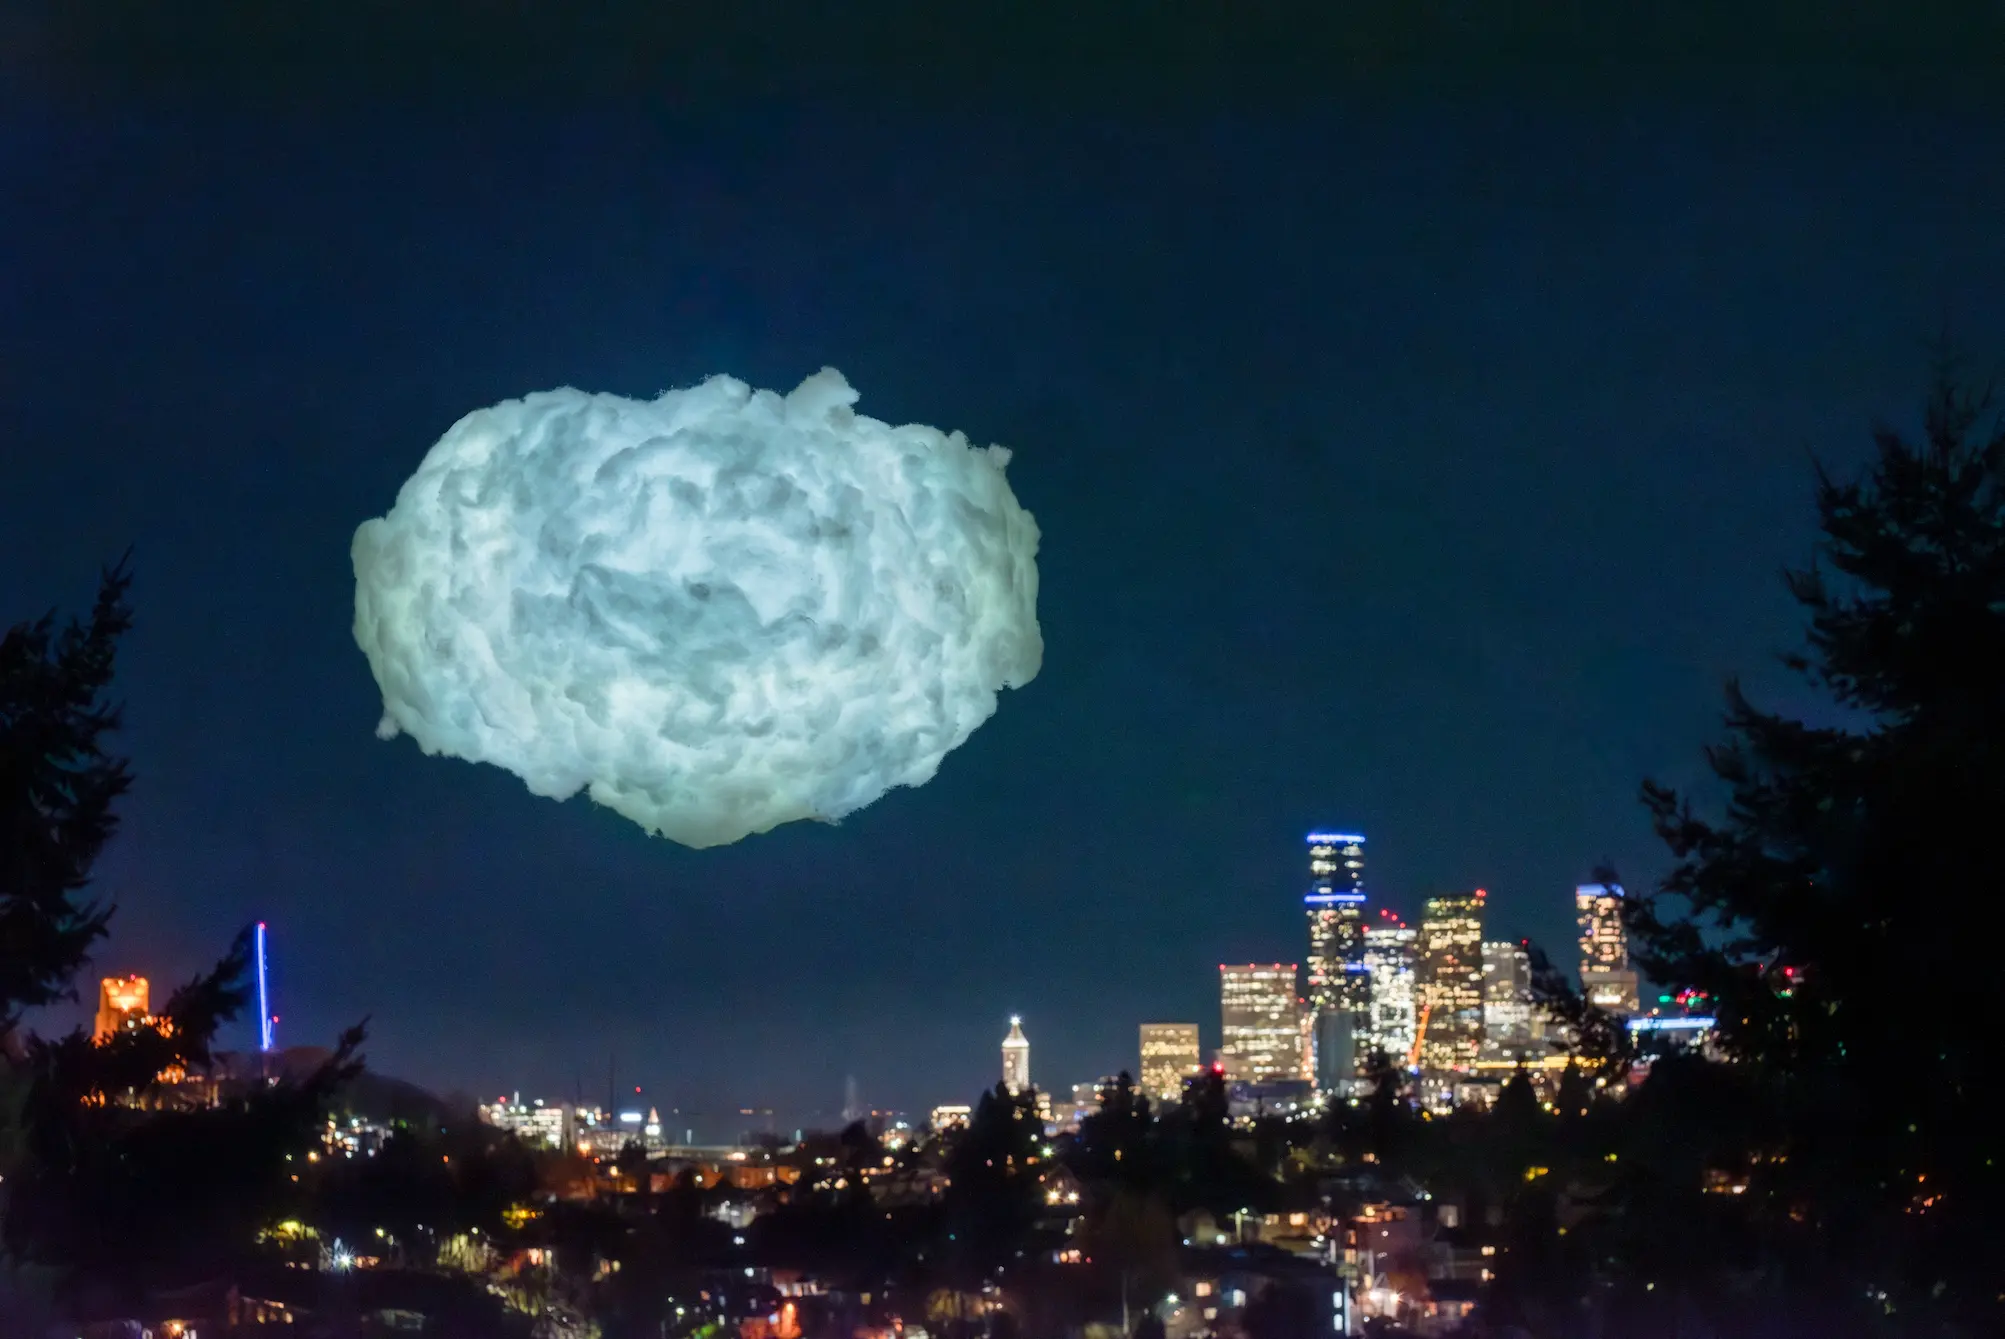 A glowing cloud floats above the Seattle skyline.